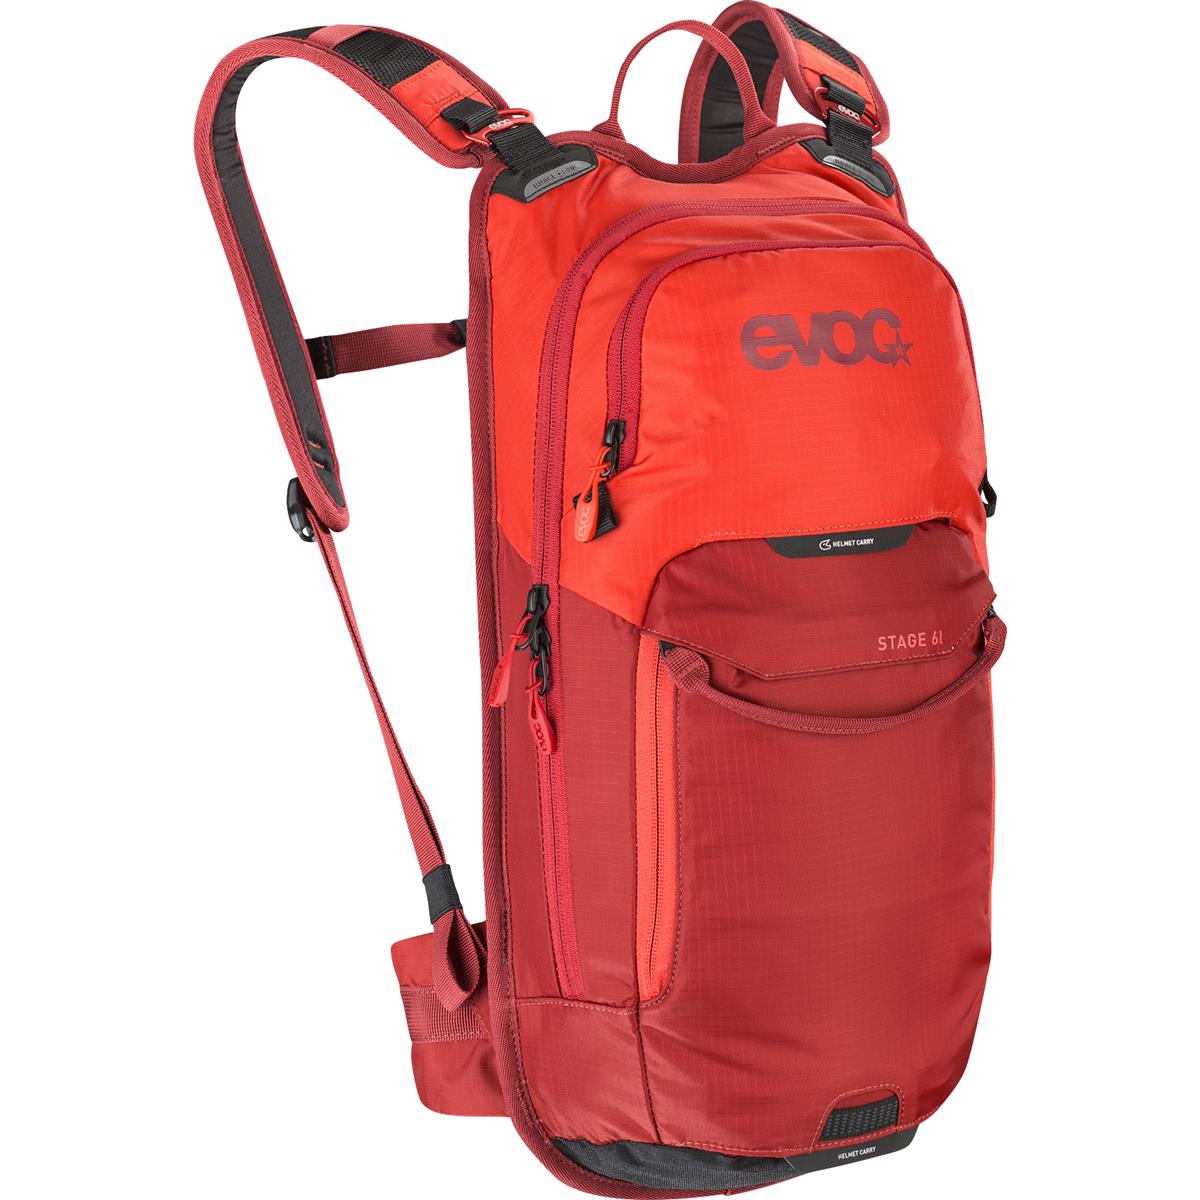 Evoc Backpack with Hydration System Compartment Stage Orange/Chili Red ...